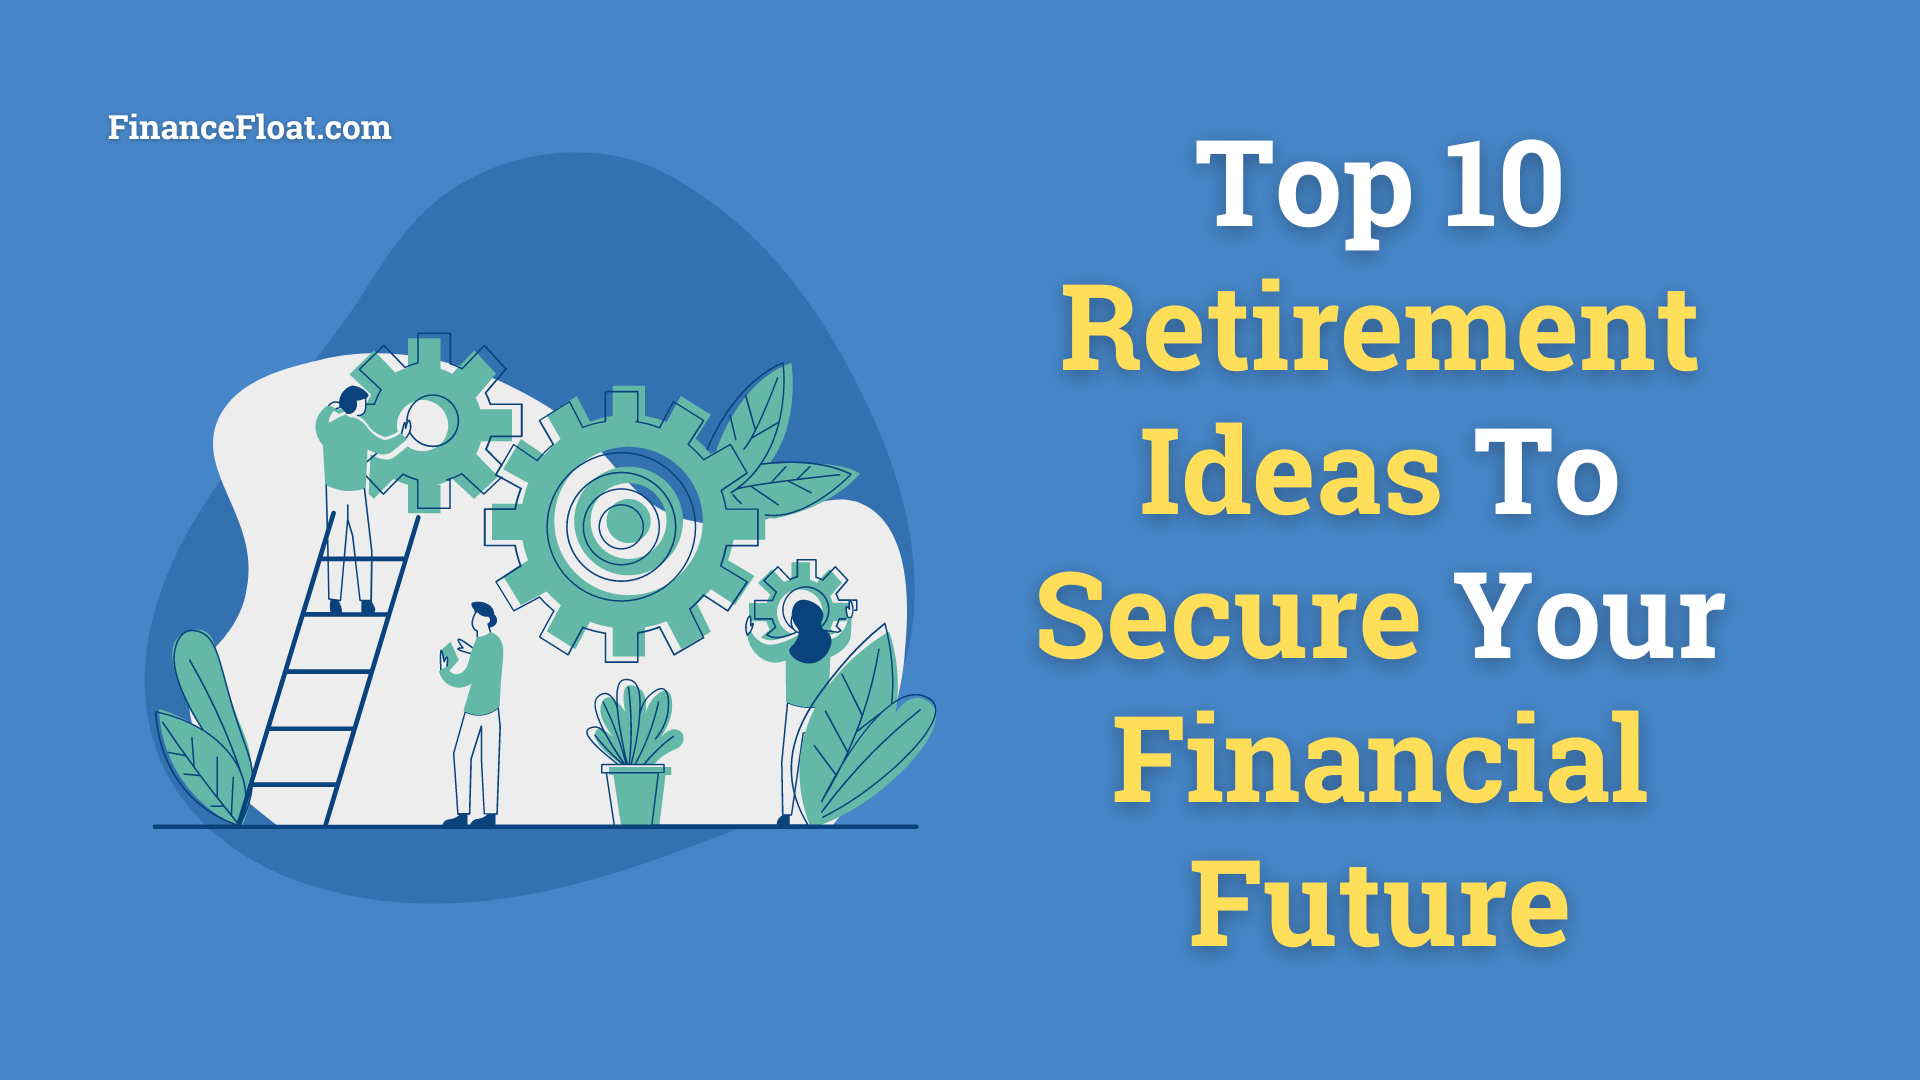 Top 10 Retirement Ideas To Secure Your Financial Future